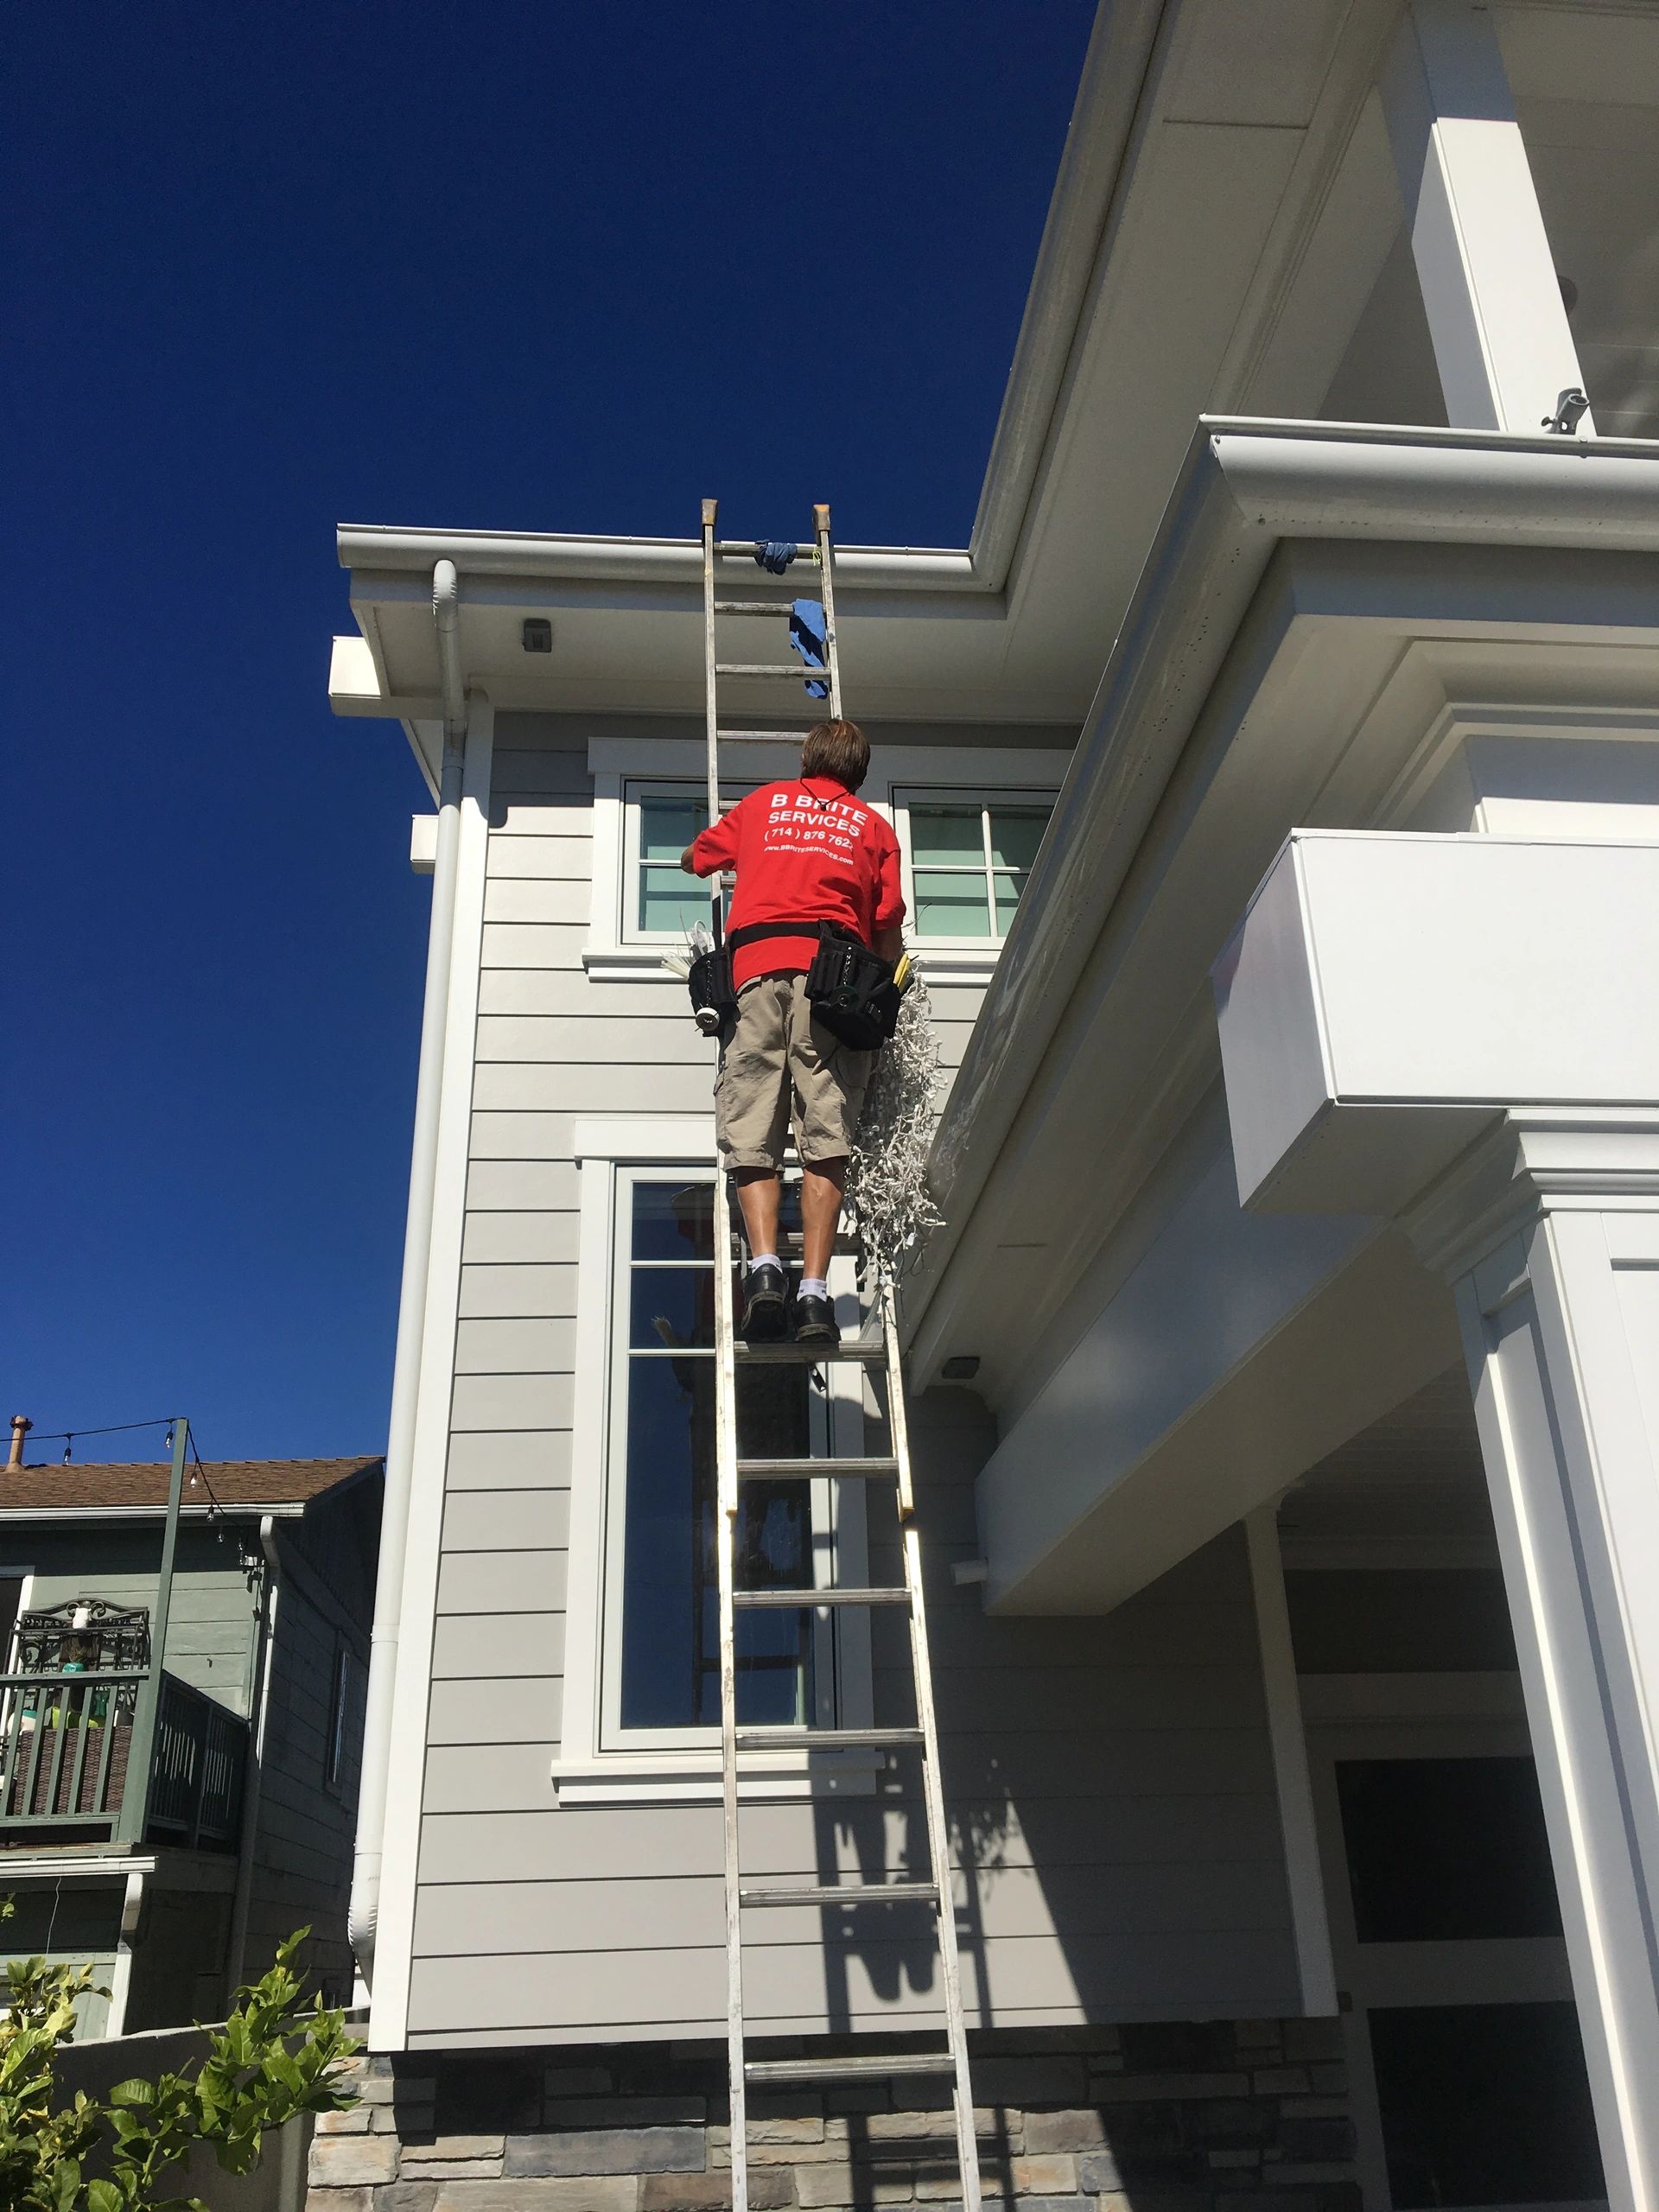 B BRITE SERVICES Residentail & Commercial Window, Solar Panel, Pressure Washing. 